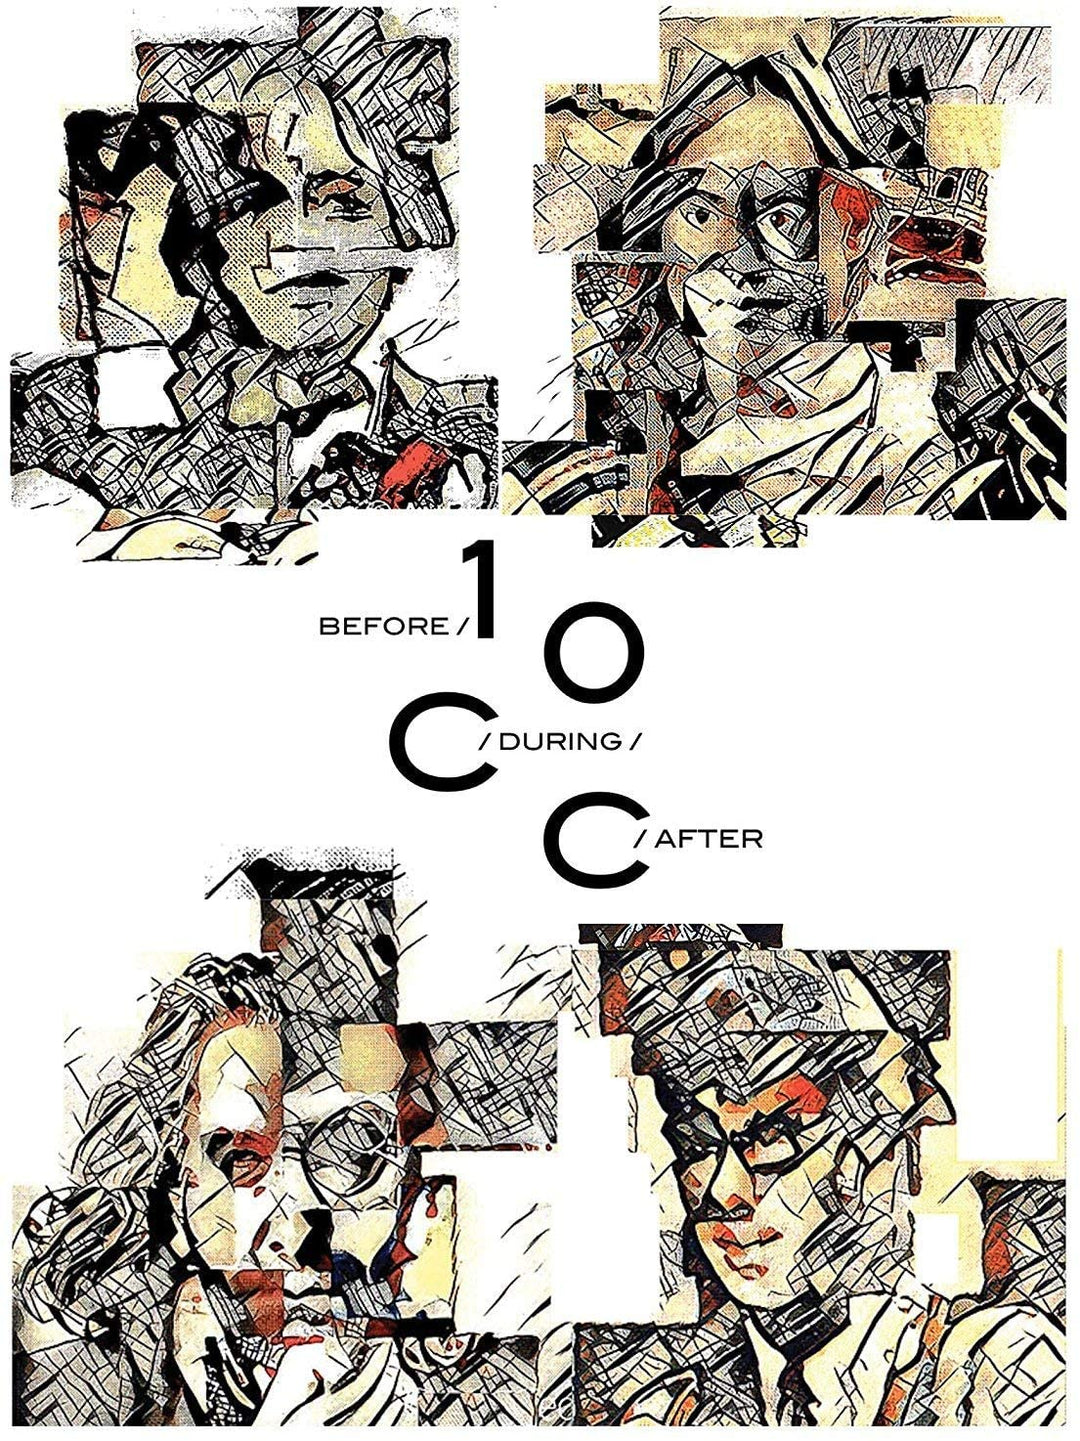 Before, During, After: The Story Of 10cc